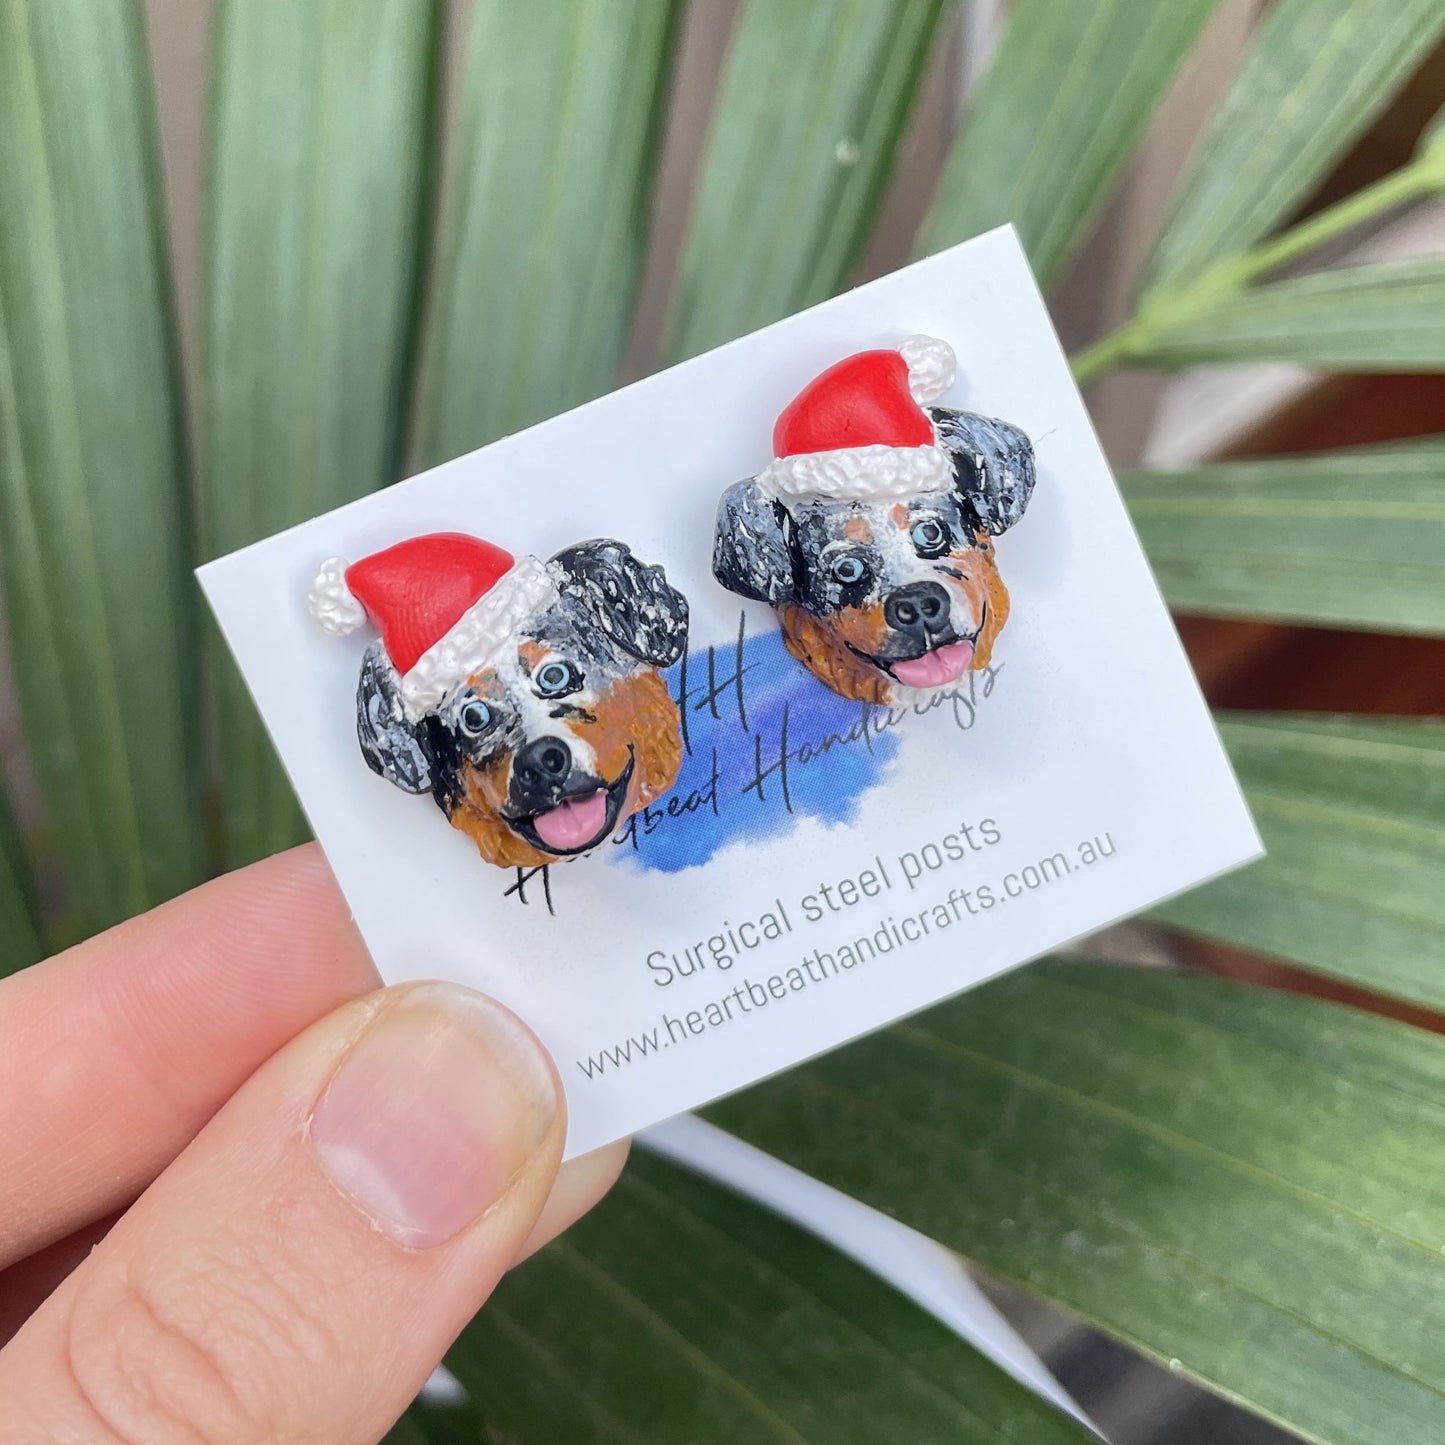 Handmade earrings of a Australian Shepherd dog wearing santa hats, made from polymer clay, held over a green palm tree background.